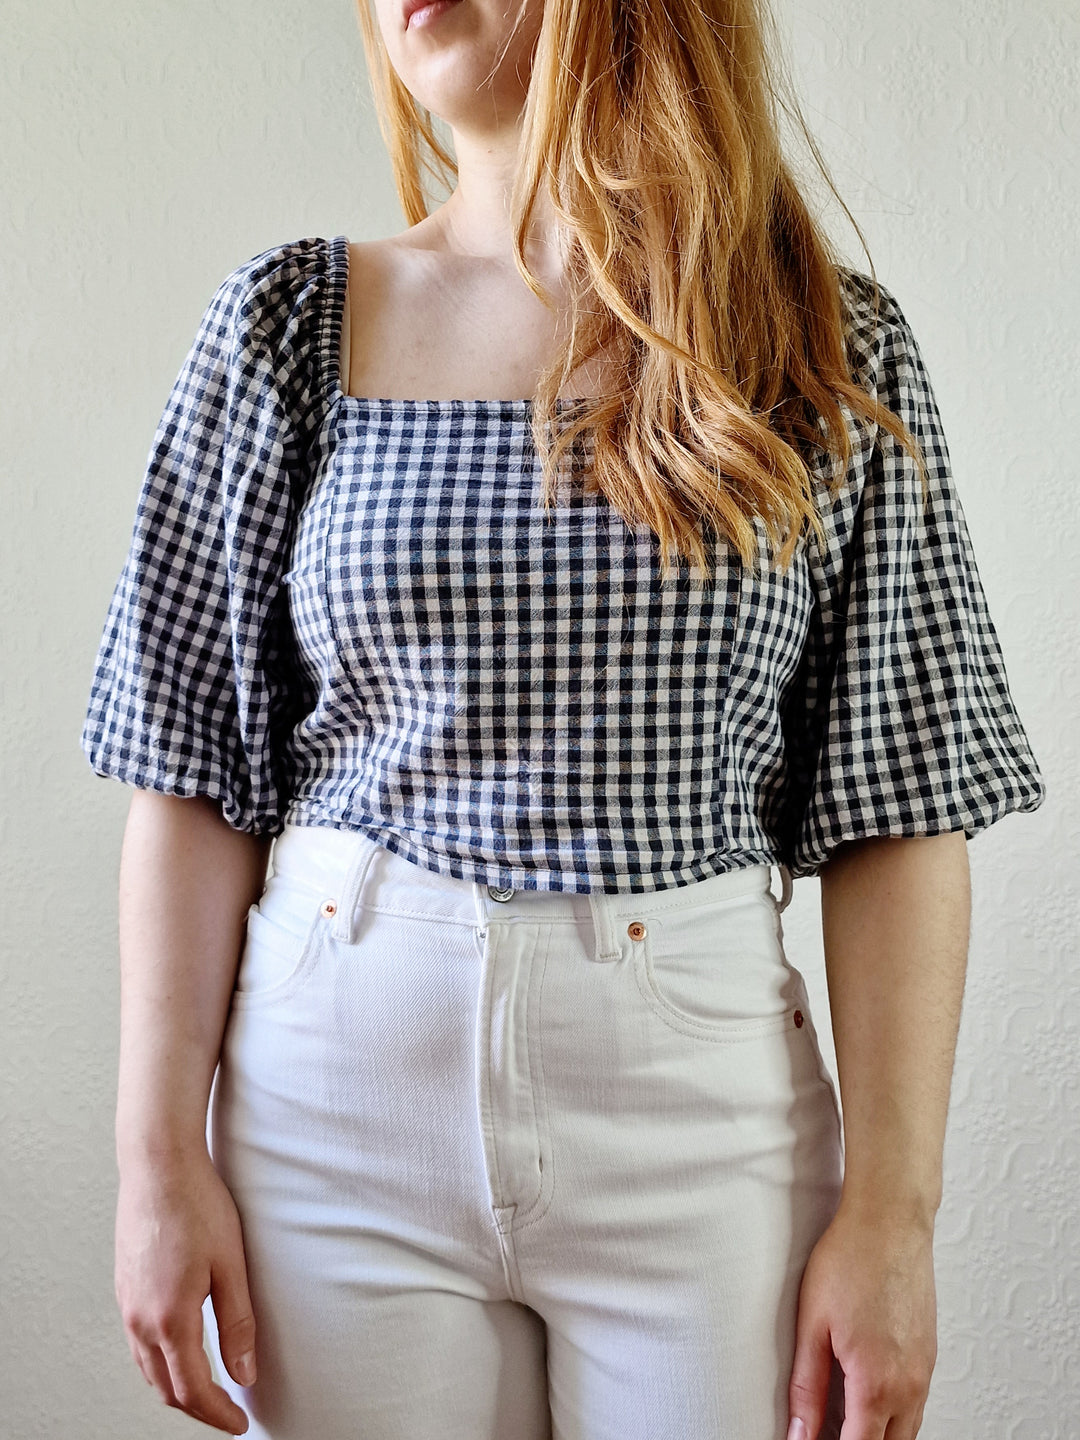 Vintage Black & White Gingham Cropped Blouse Top with Puff Sleeves - M